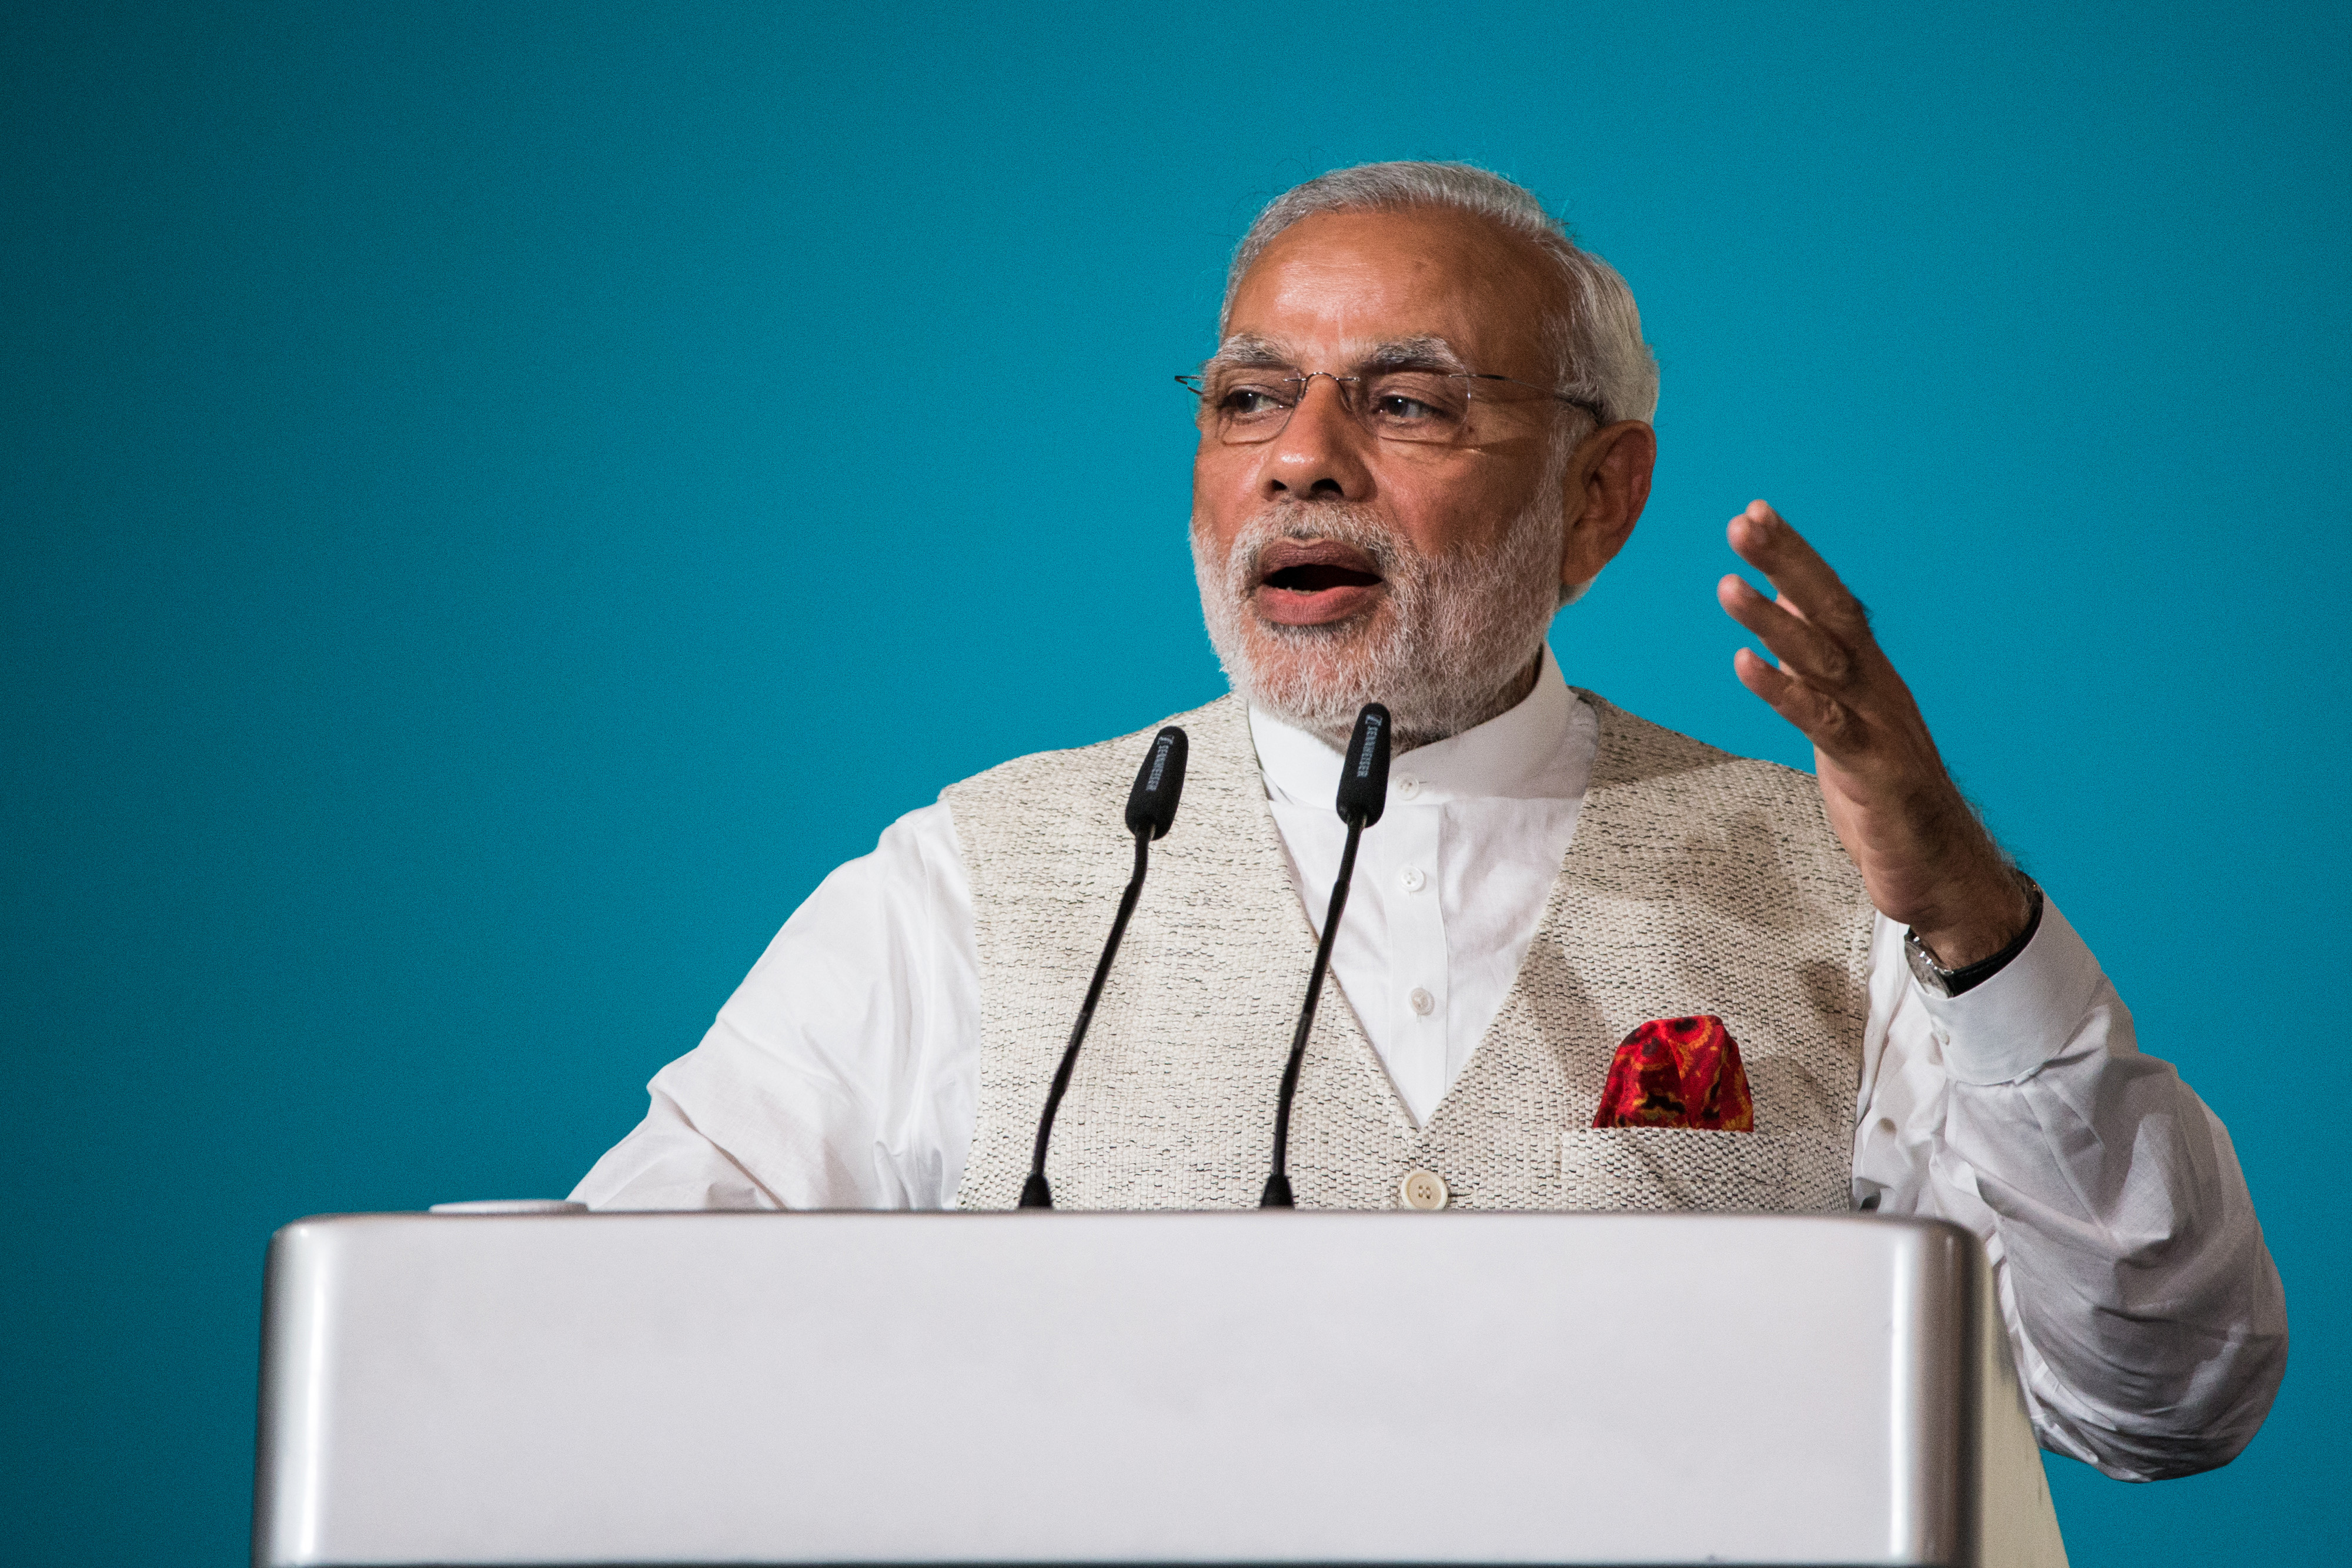 Narendra Modi, India's prime minister, gestures whilst speaking during the 37th Singapore Lecture held at the Shangri-La Hotel in Singapore, on Monday, Nov. 23, 2015.